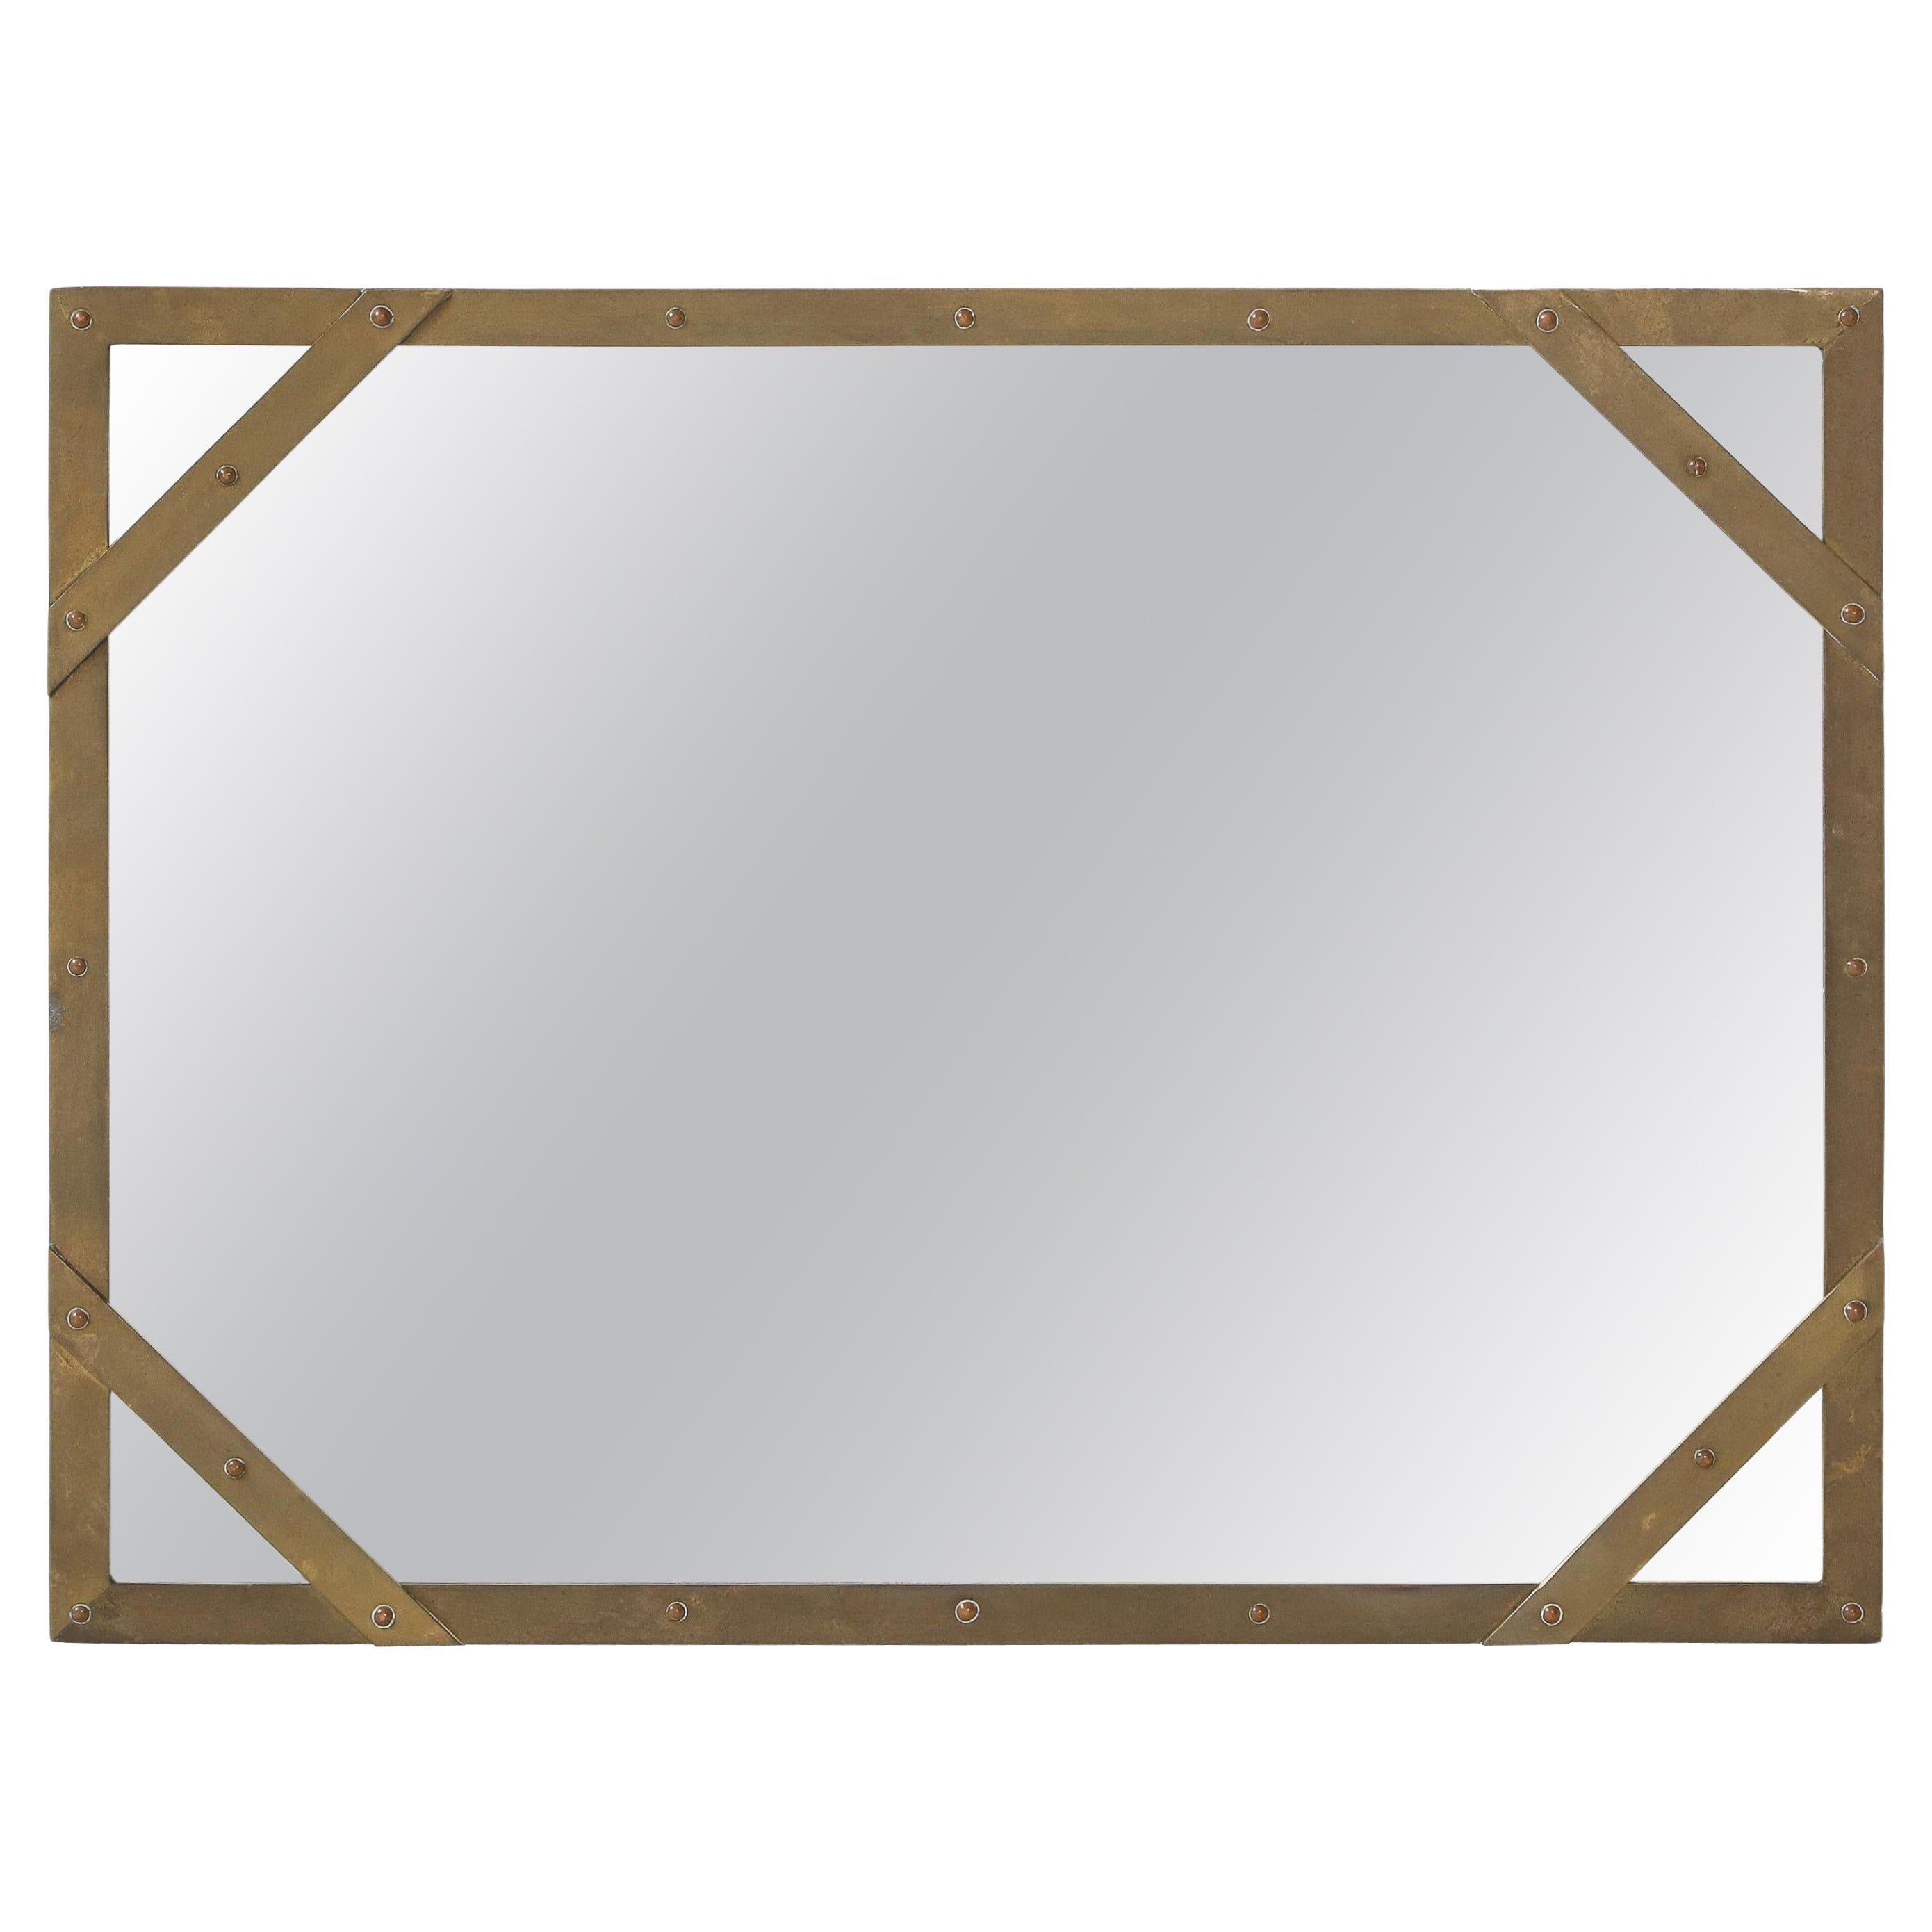 Sarried Ltd. Brass Wall Mirror, Italy For Sale